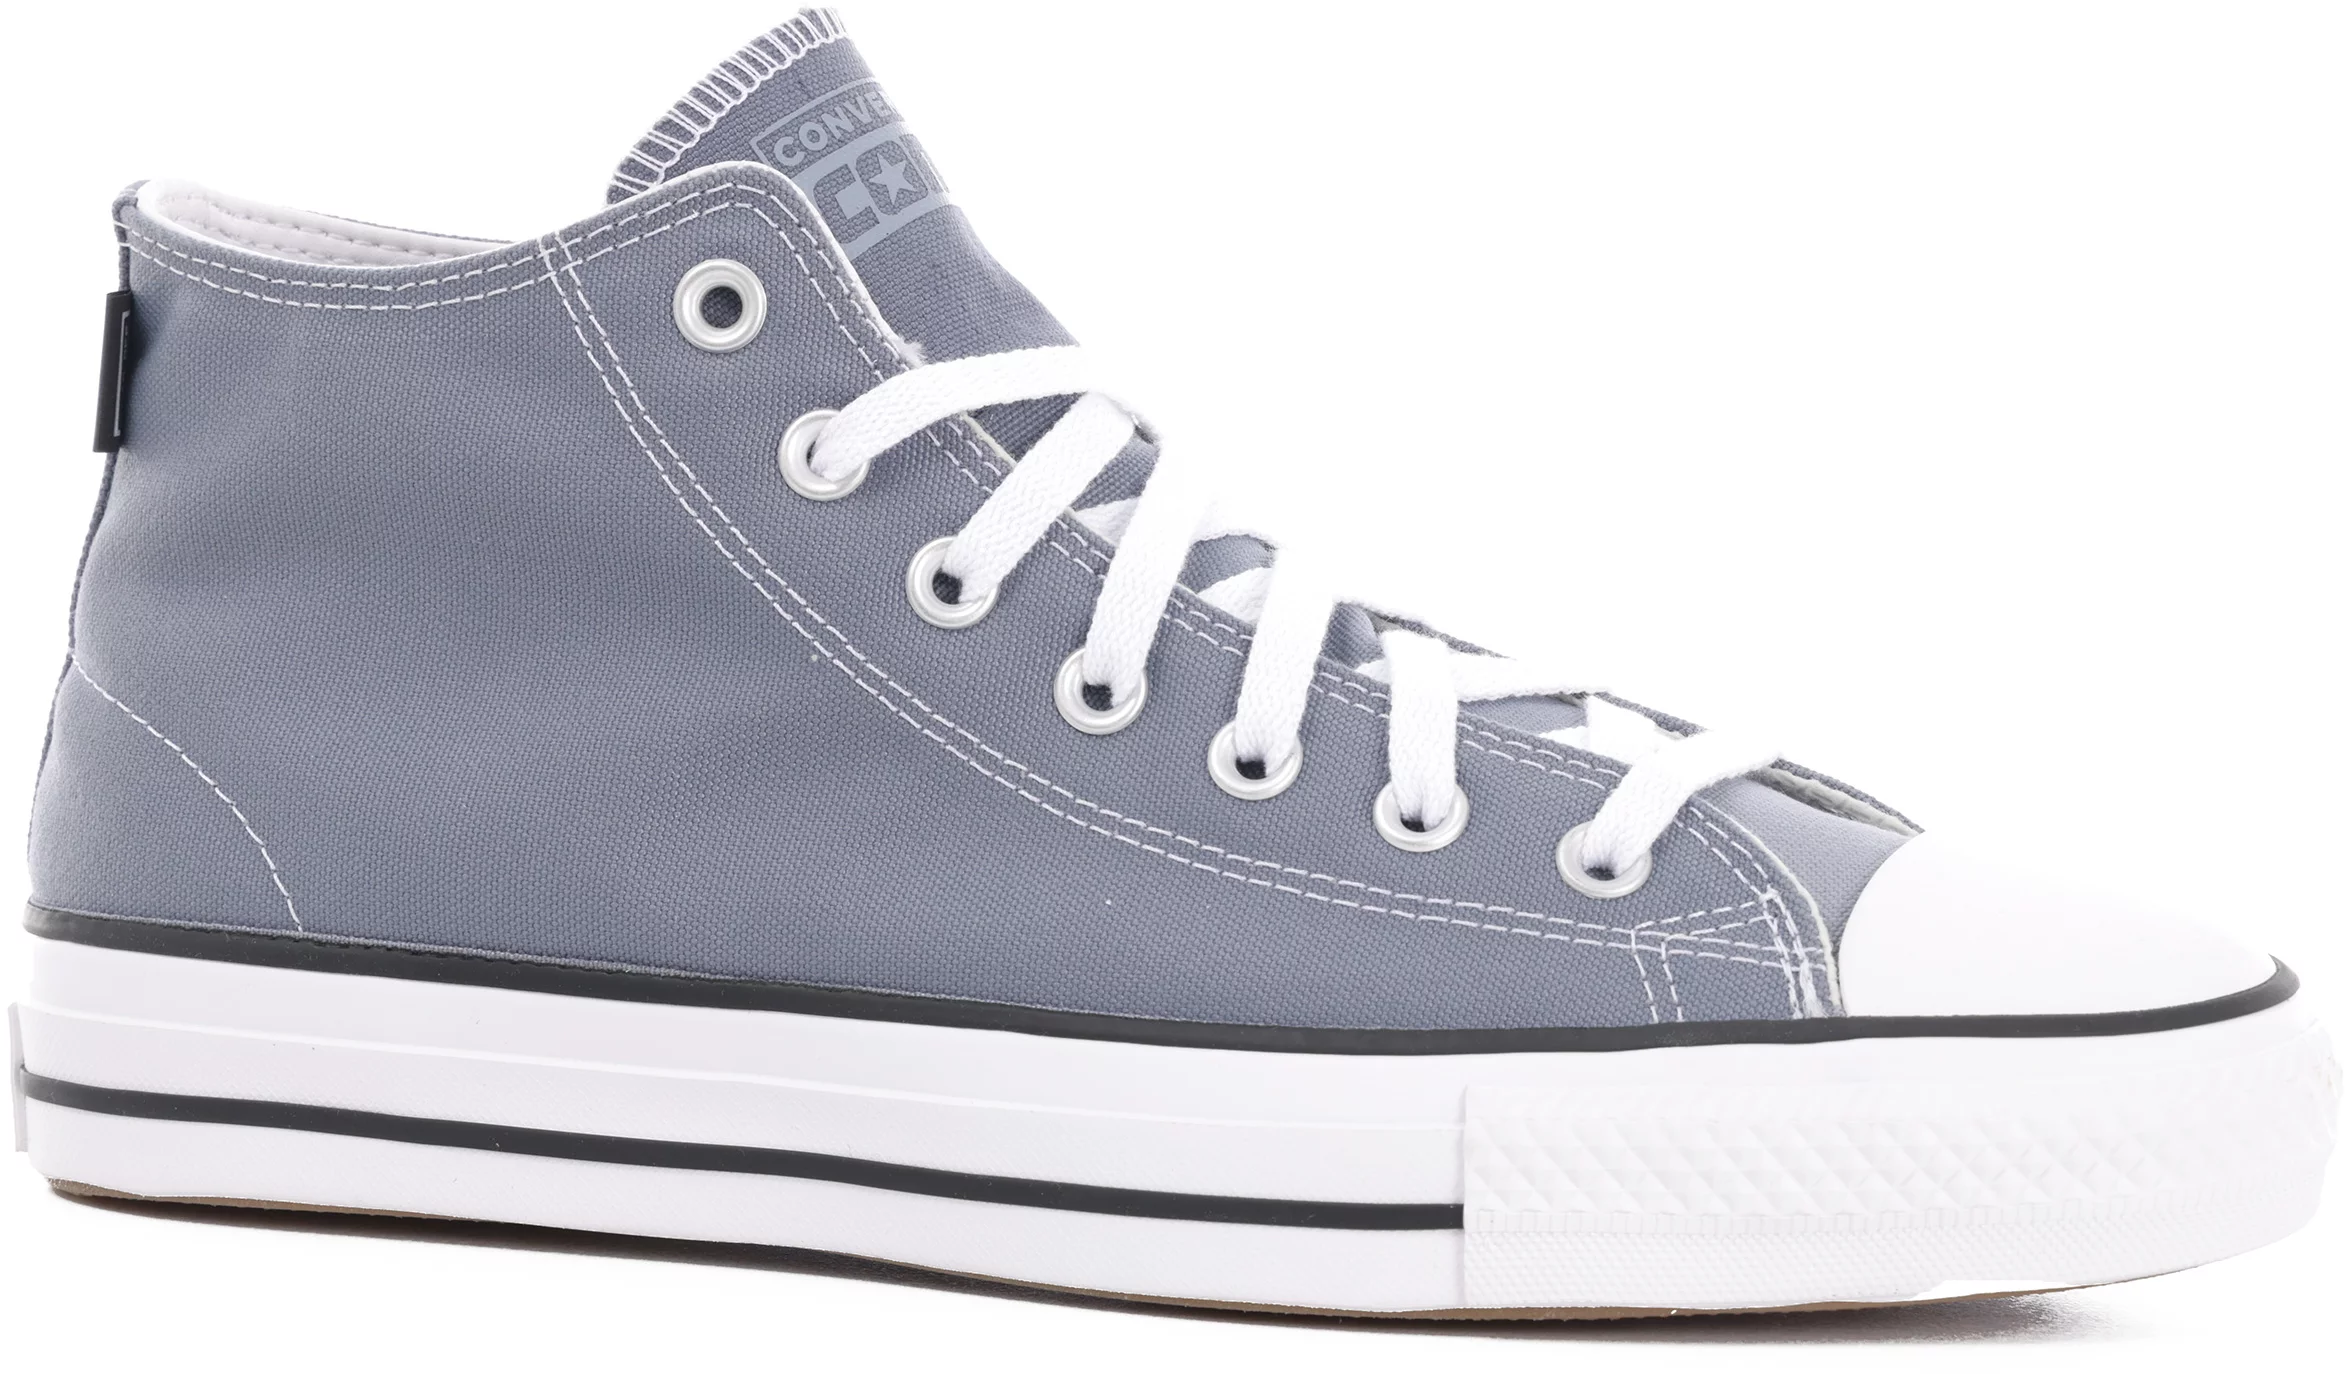 Chuck Taylor All Star Pro Mid Skate Shoes